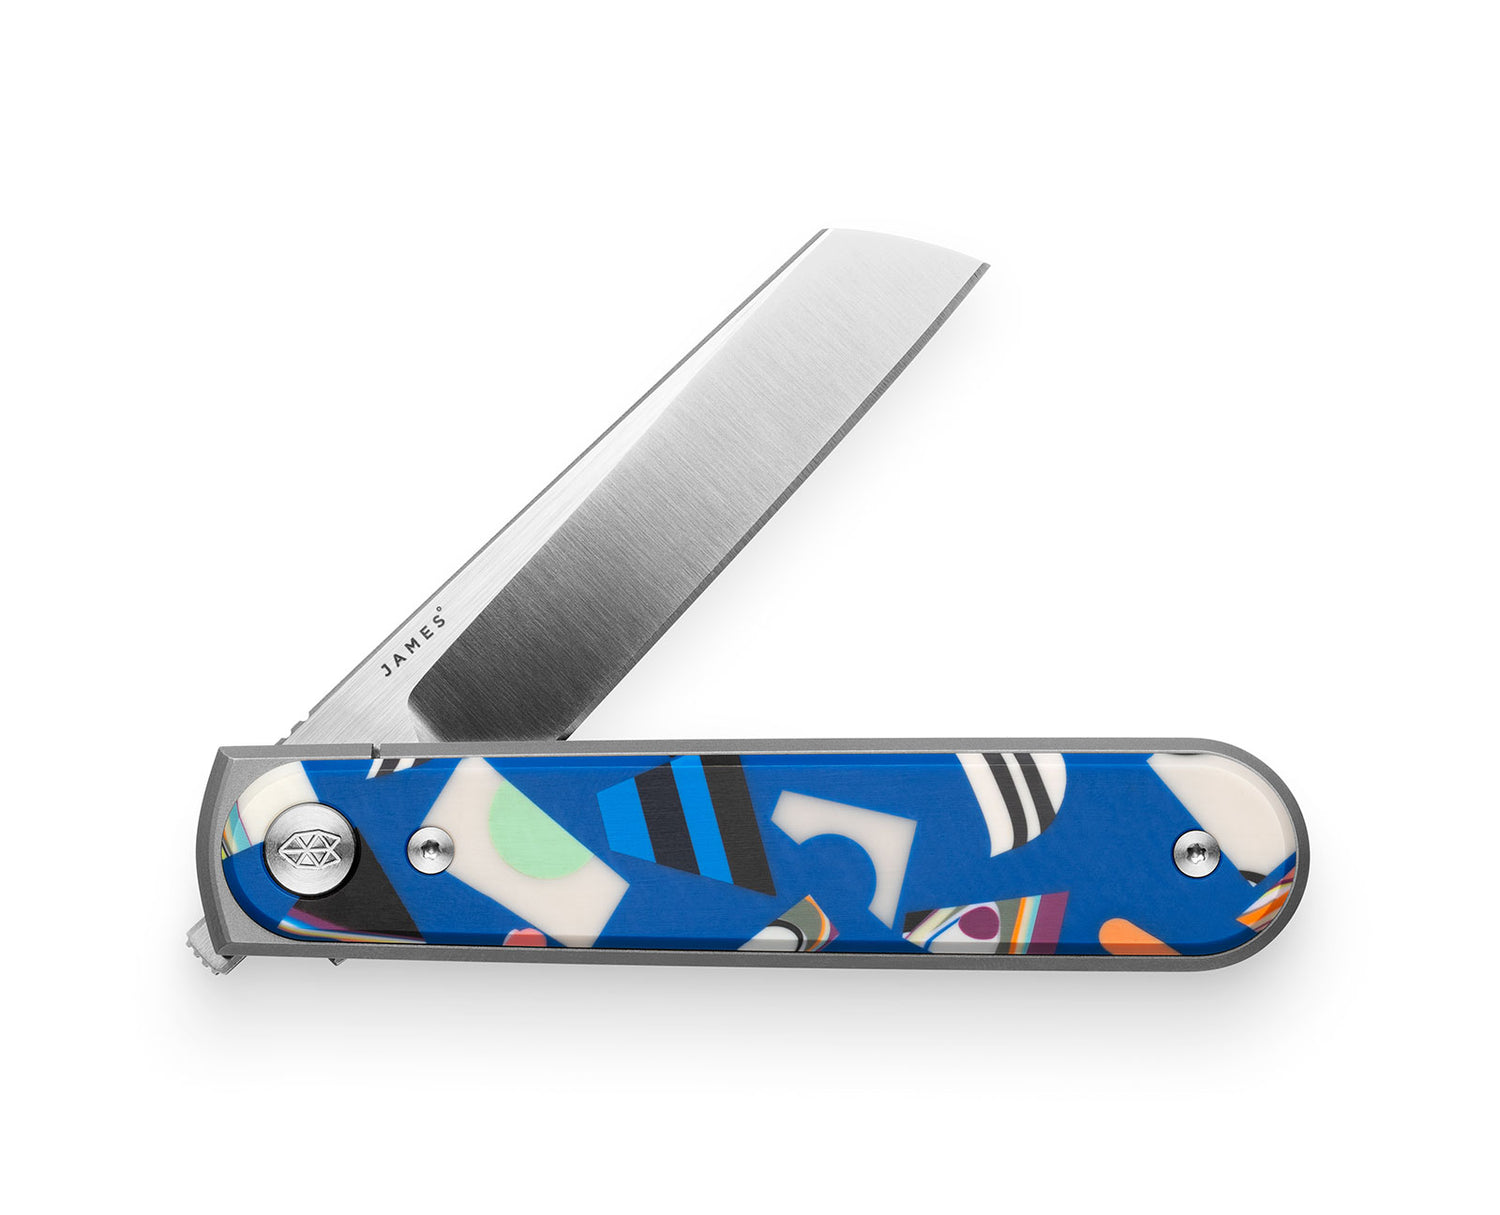 The Duval knife with decorative handle and stainless steel blade.